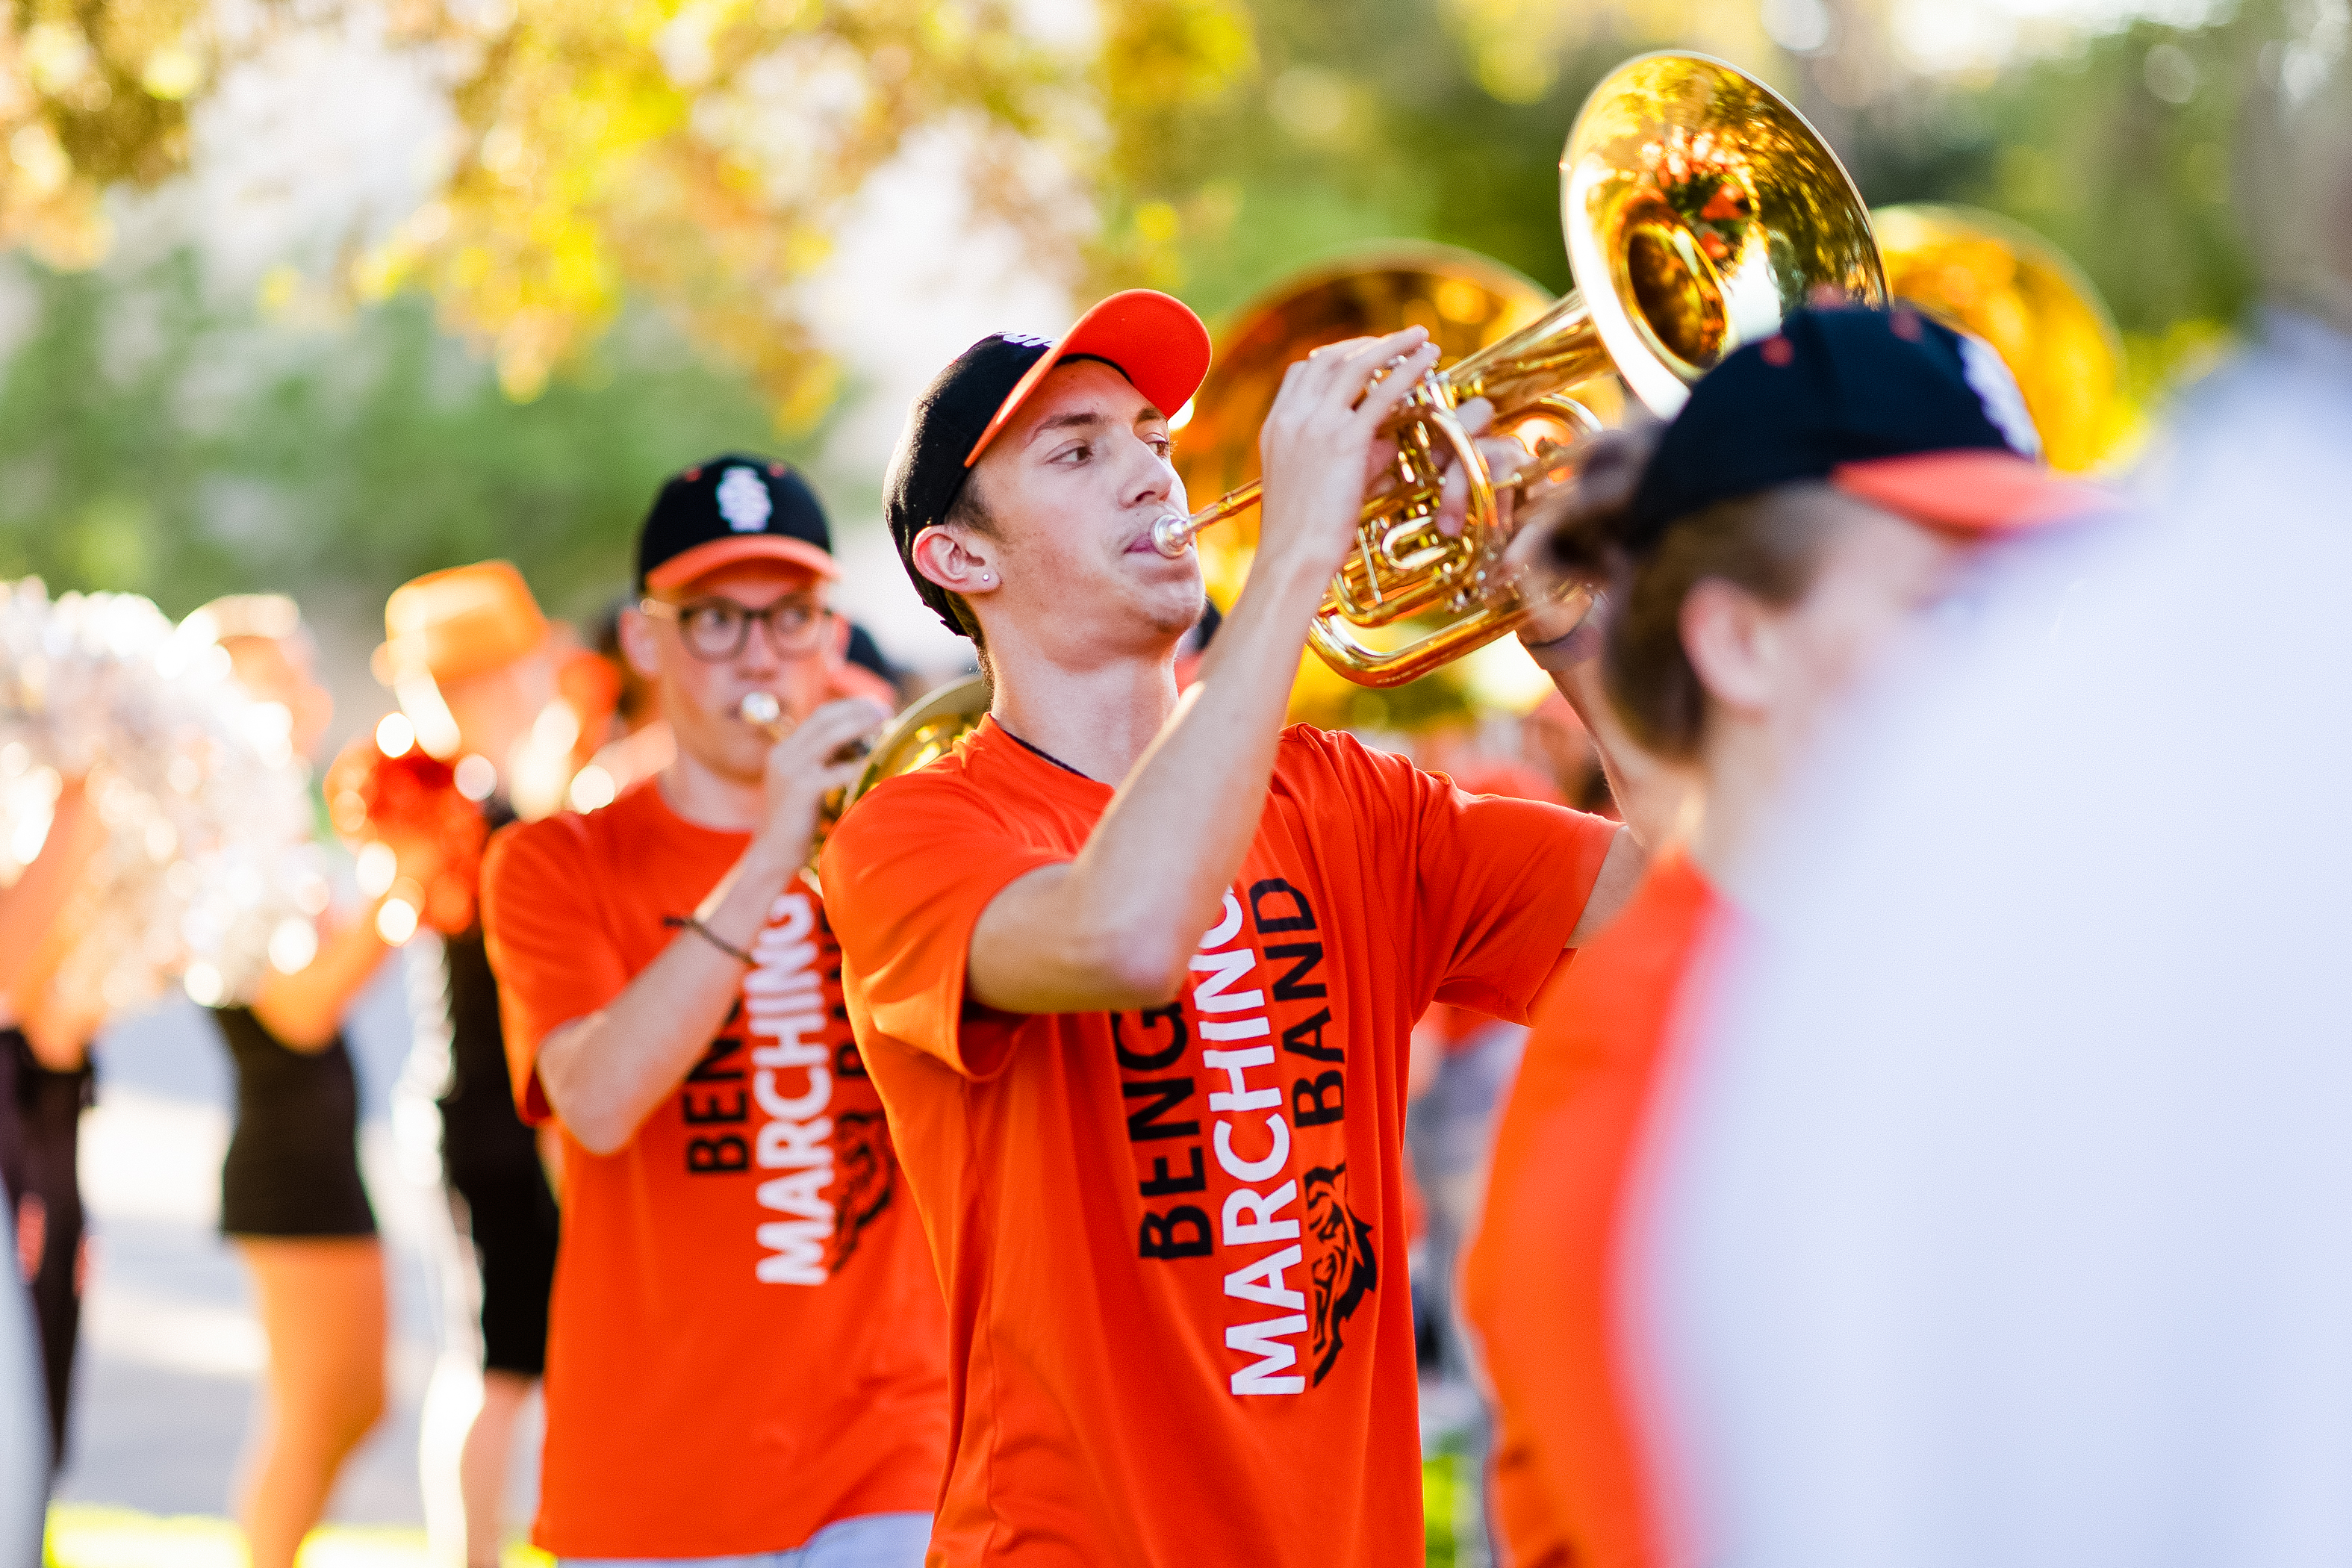 Student musicians playing brass instruments at an ISU event